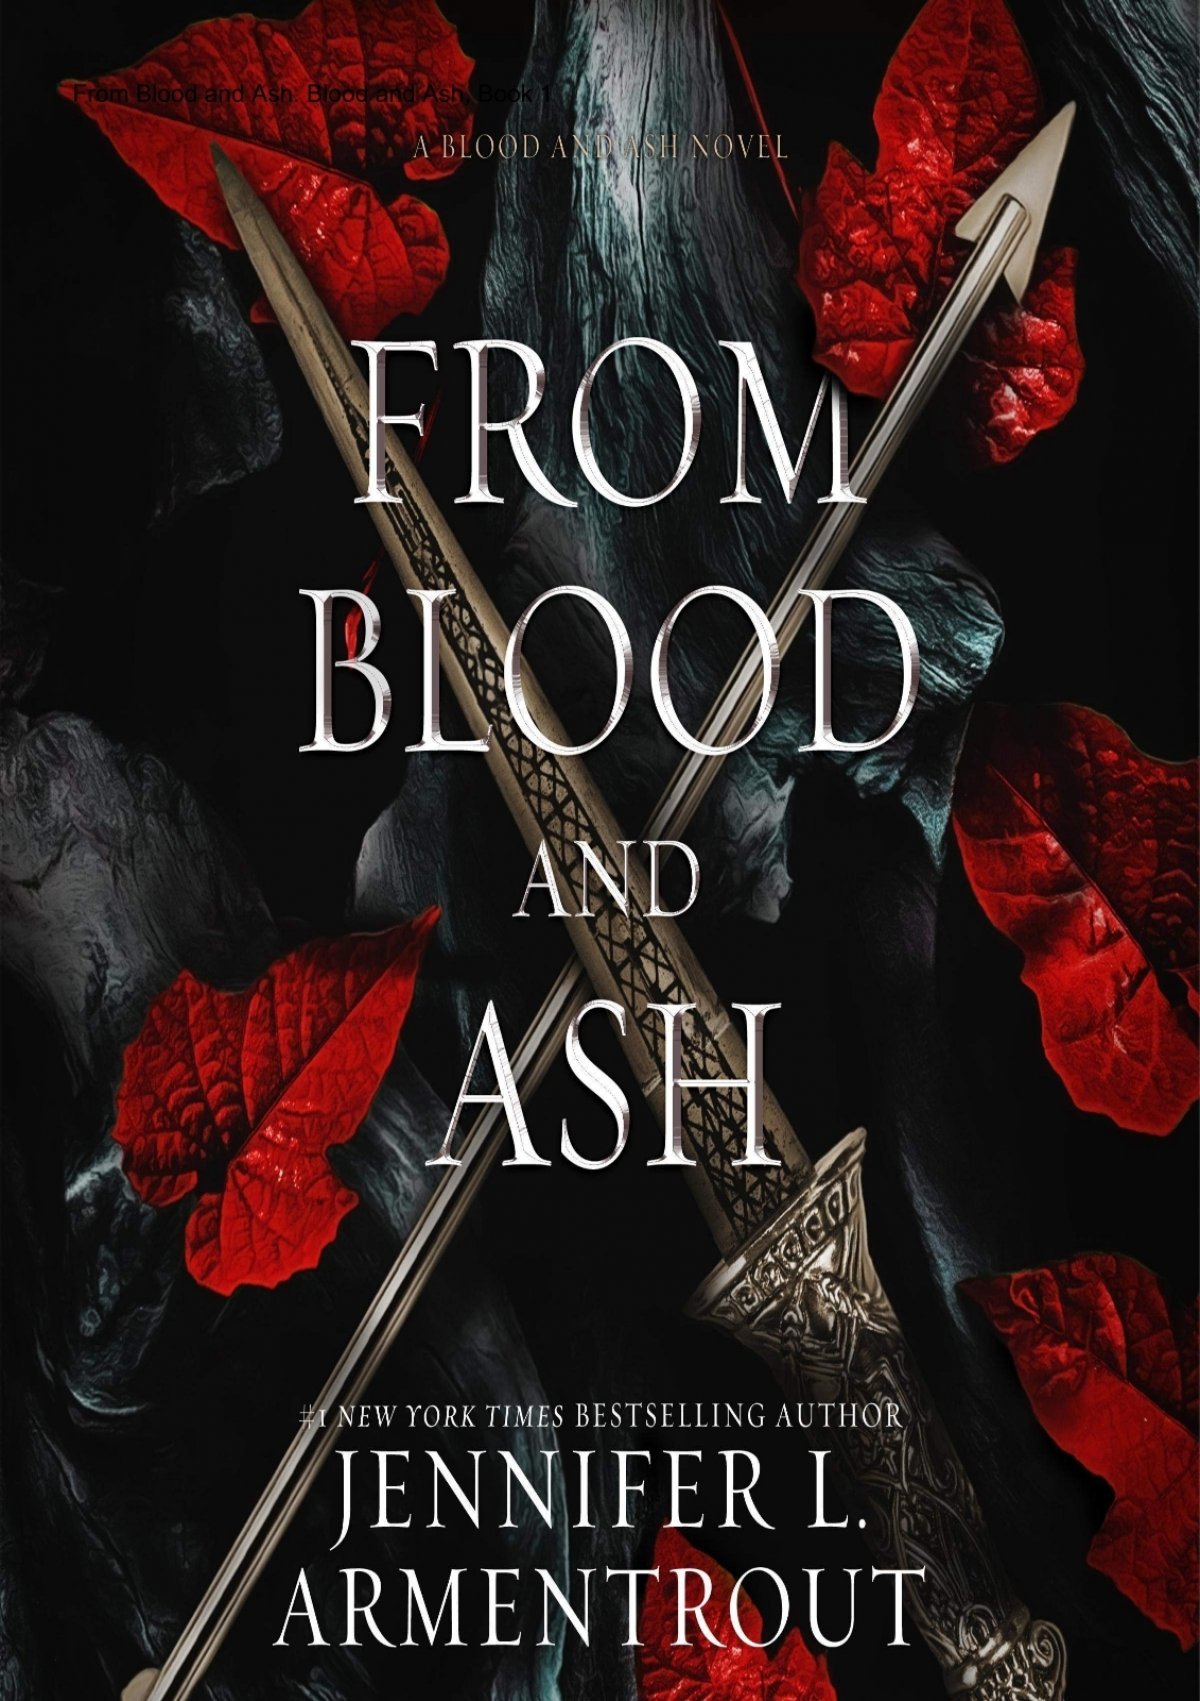 (^PDF/BOOK)->DOWNLOAD From Blood and Ash: Blood and Ash, Book 1